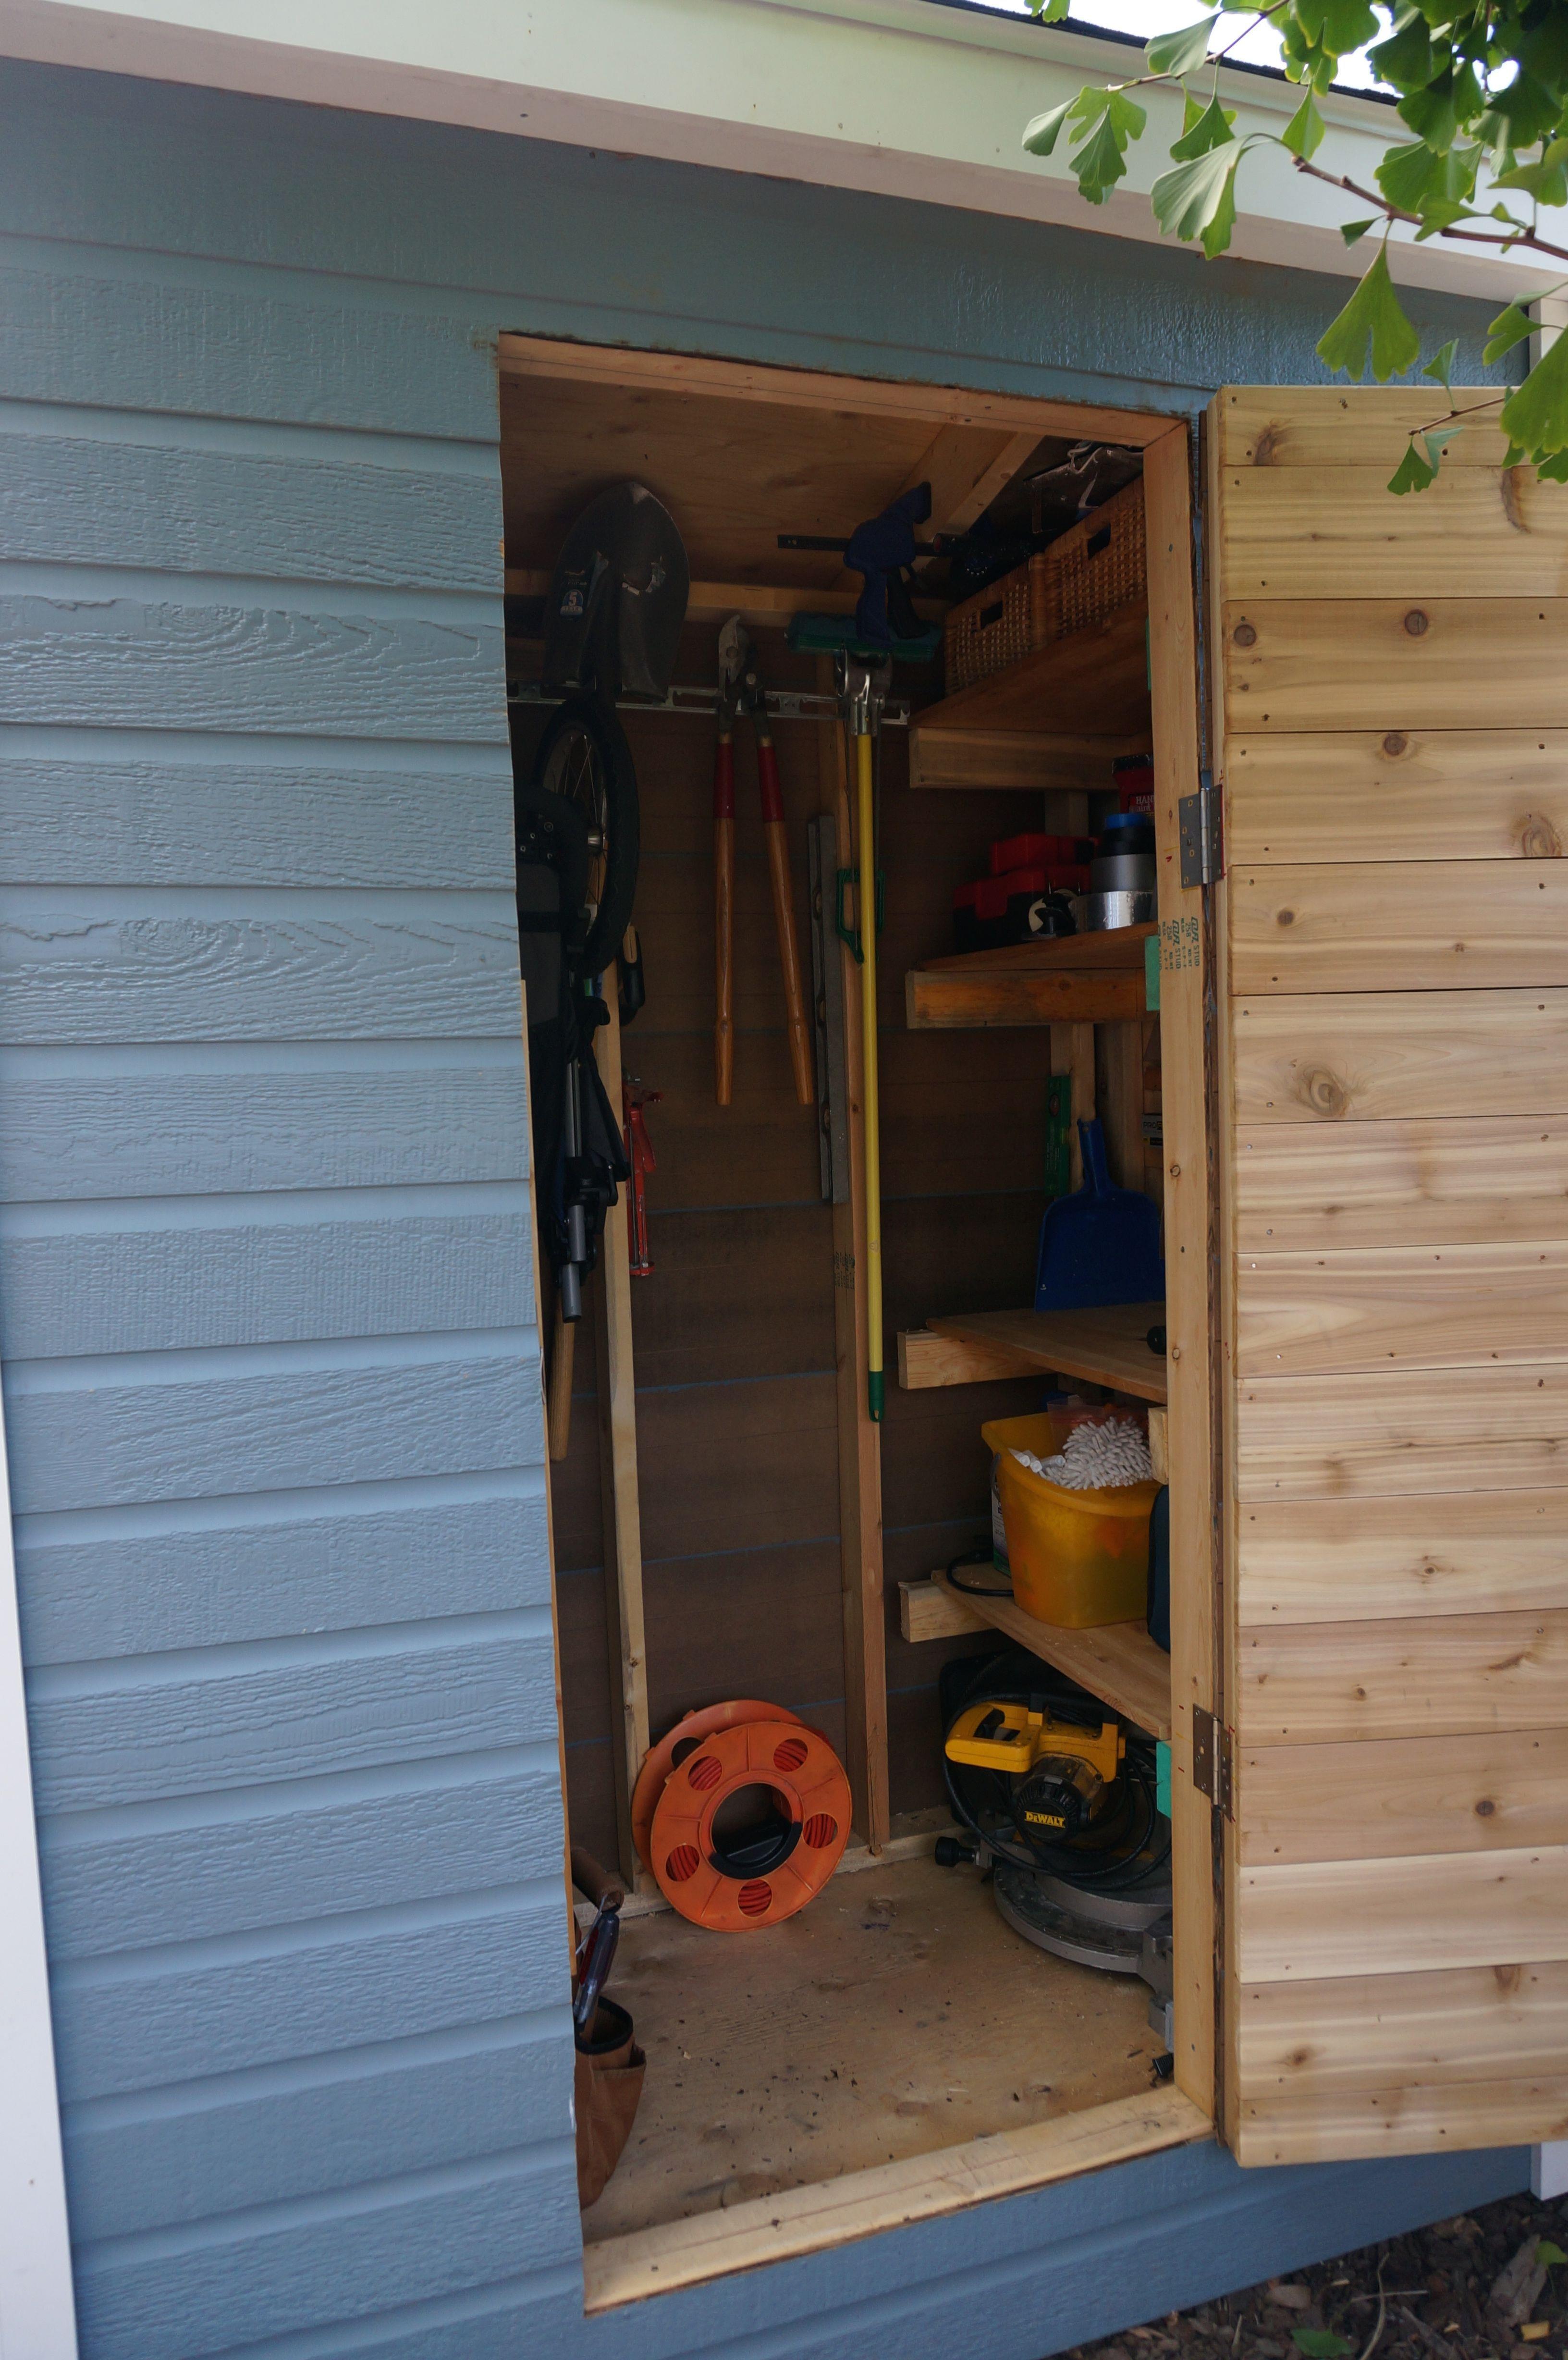 Canexel blue Sarawak shed 3x6 with concealed single door in Washington DC. ID number 181389-4